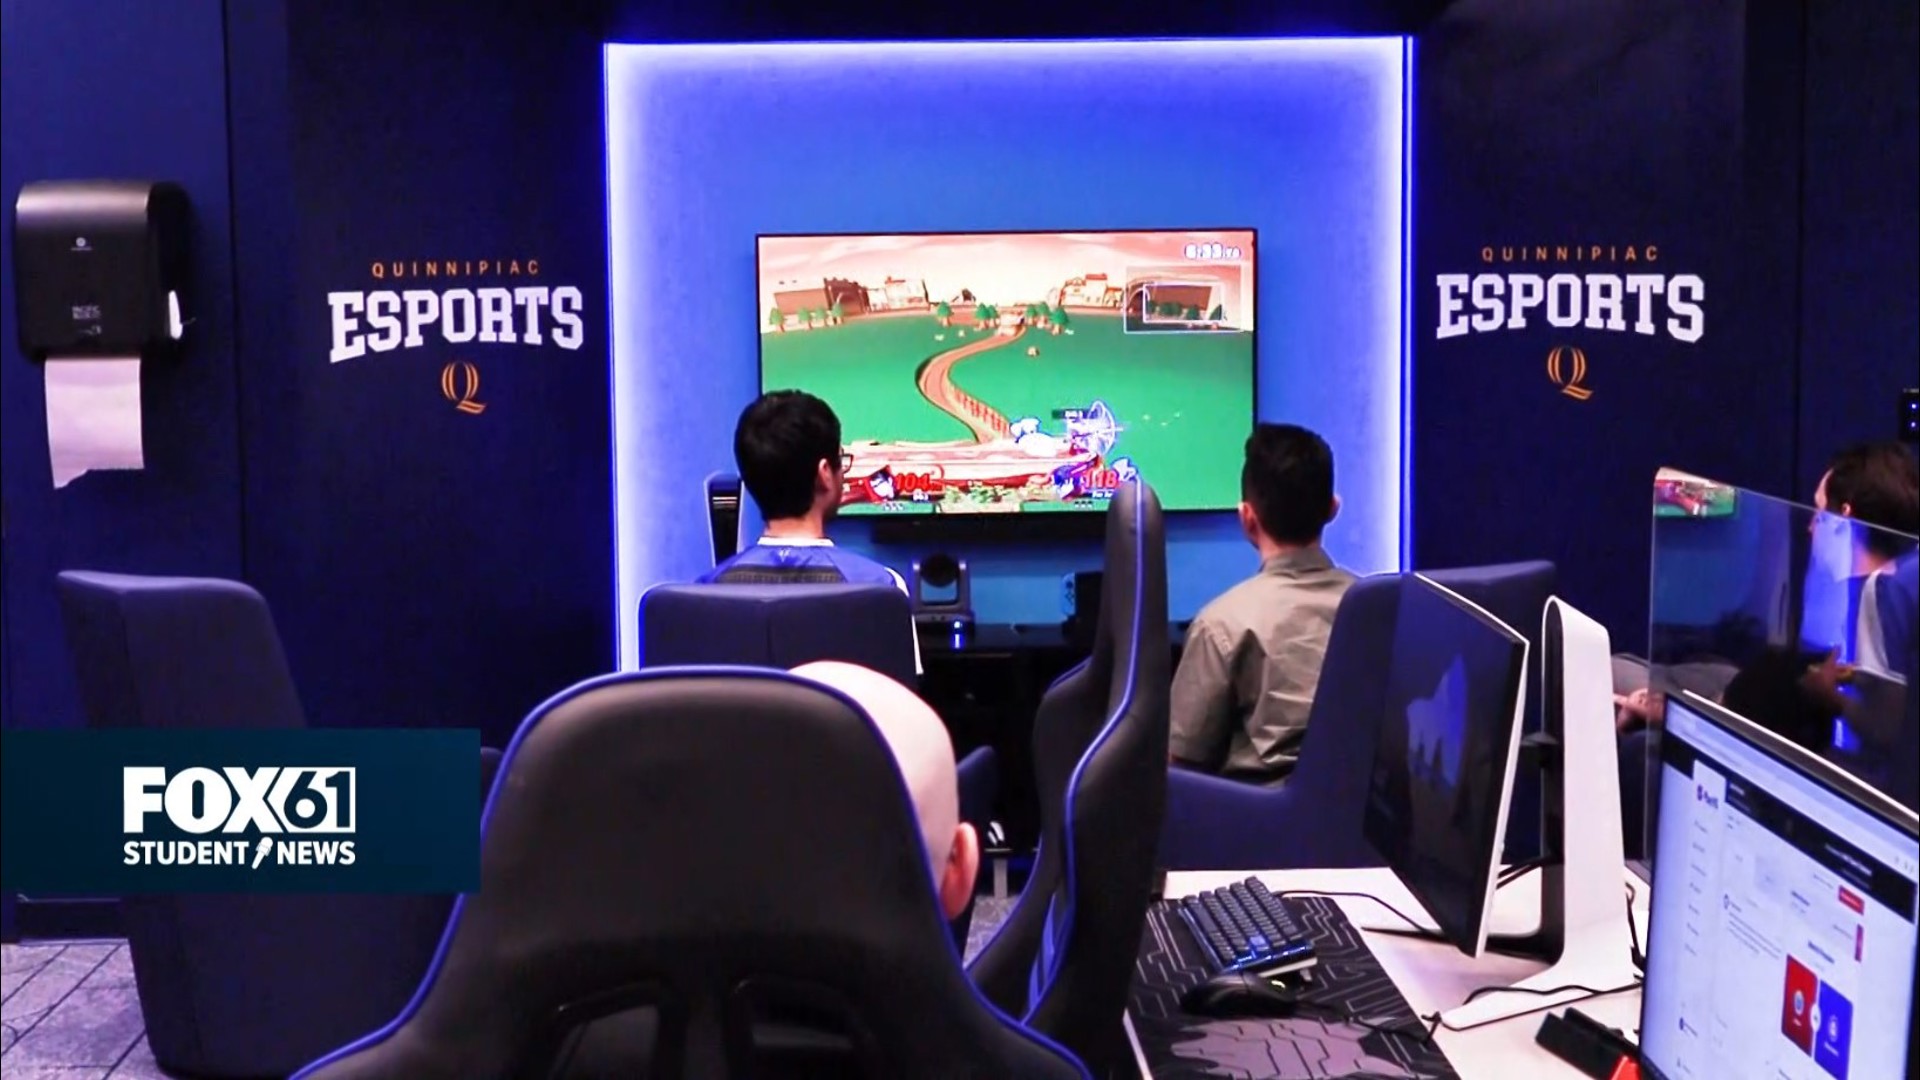 The divide between athletic competitions and esports have been controversial for years, but Quinnipiac treats them the same.